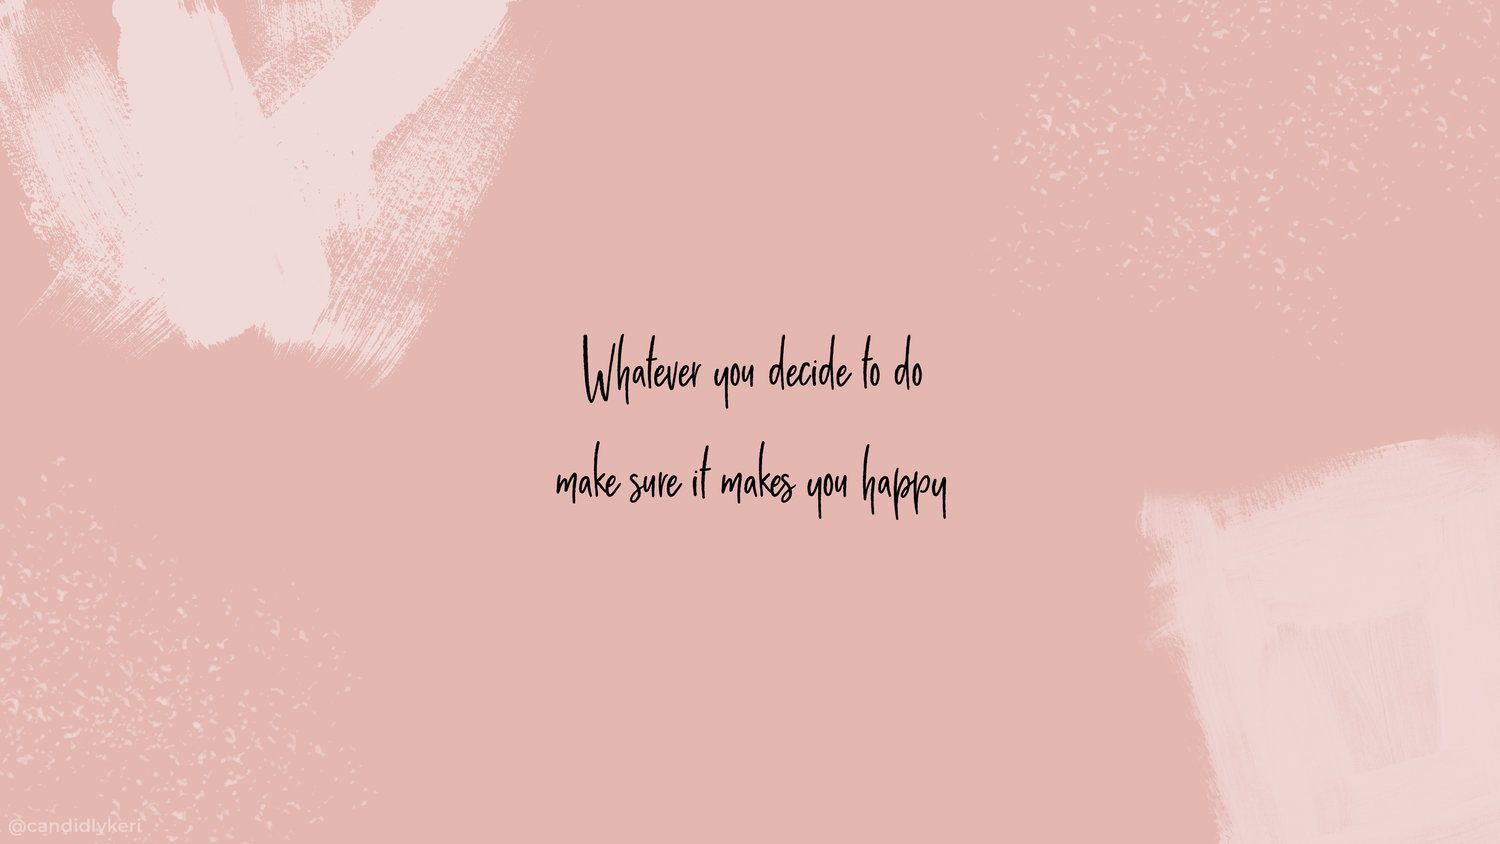 Whatever you decide to do make sure it makes you happy